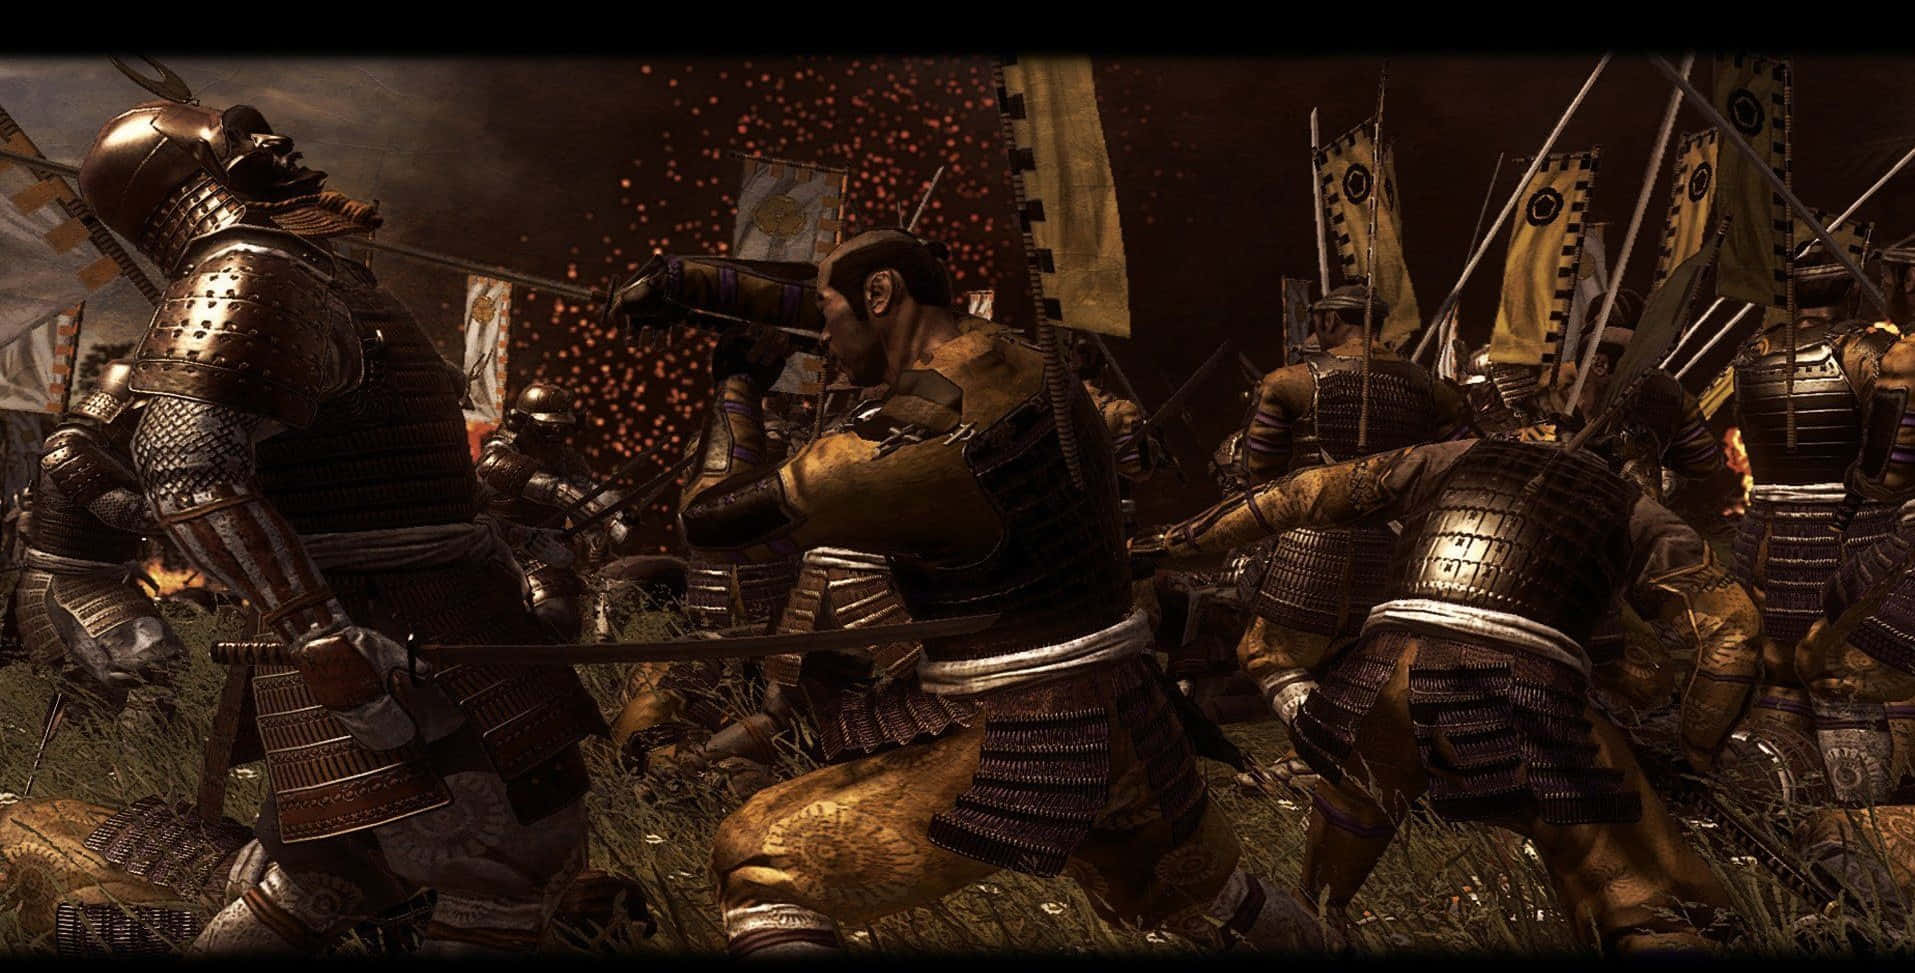 A Group Of Men In Armor Fighting In The Field